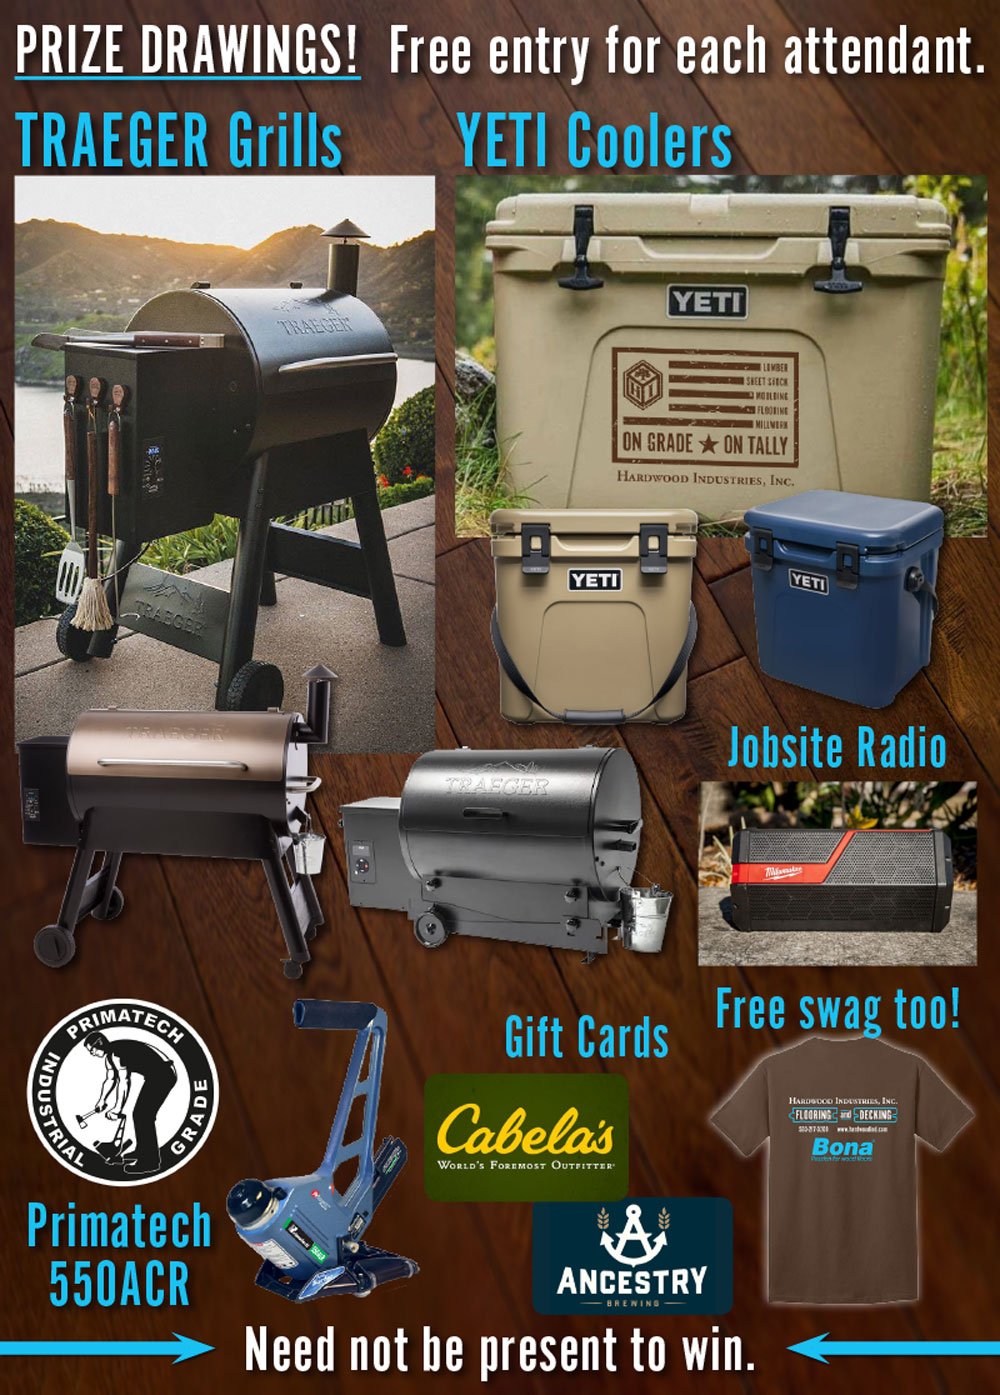 Don’t miss your opportunity to win a Traeger Grill, Yeti Cooler, and more!  Plus, day-of-only sale specials during the grand opening celebration.